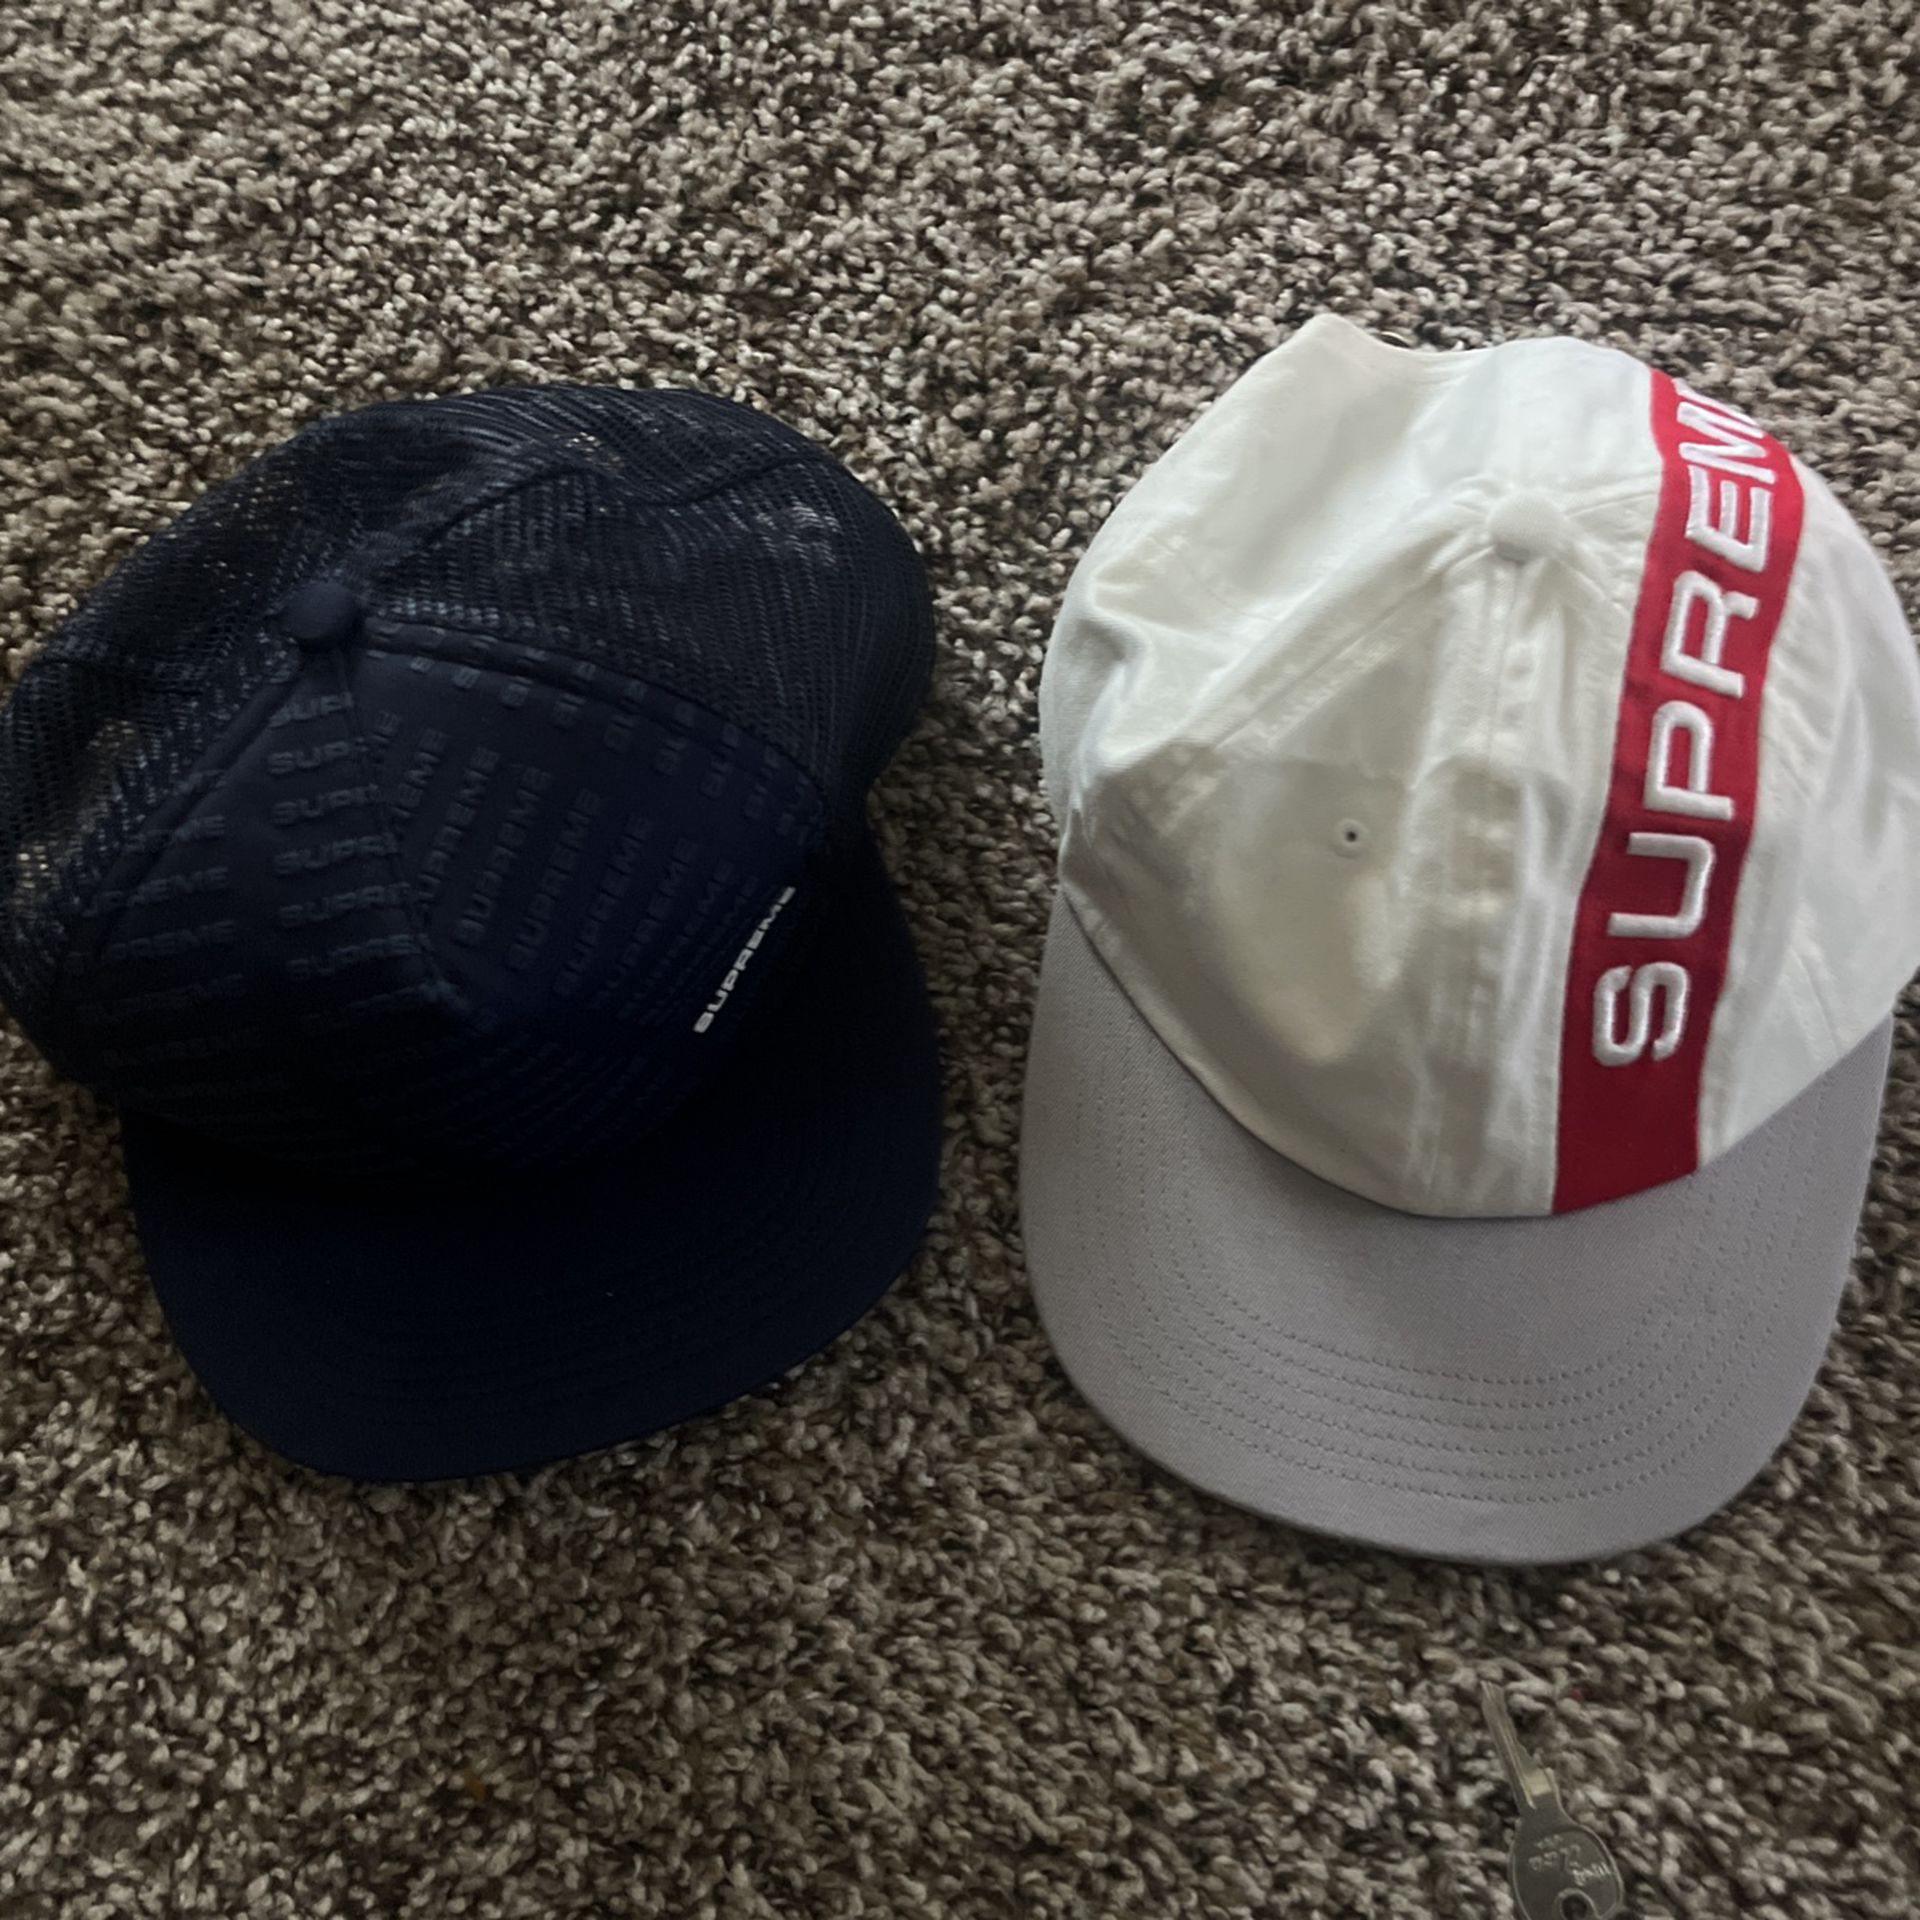 Supreme Hats $60 Each Or Both For $90